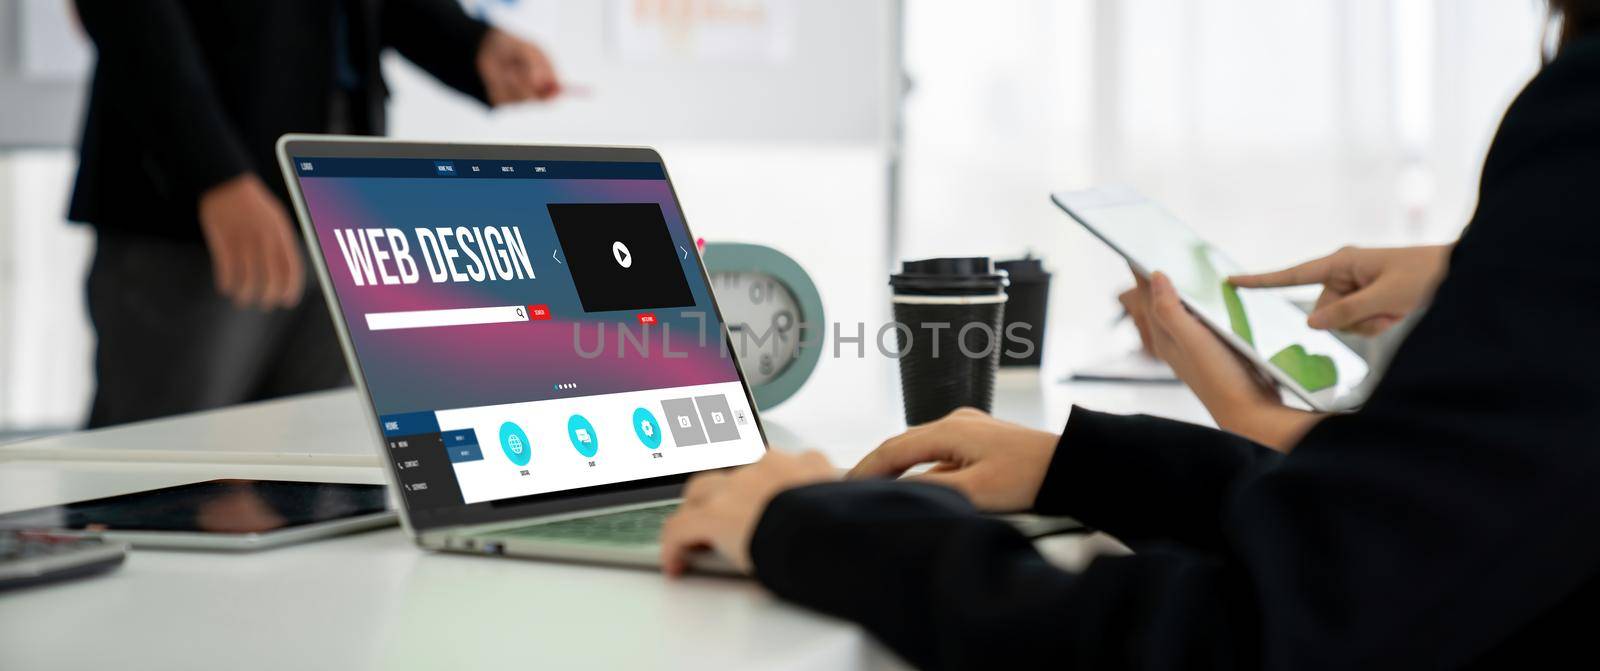 Website design software provide modish template for online retail business by biancoblue